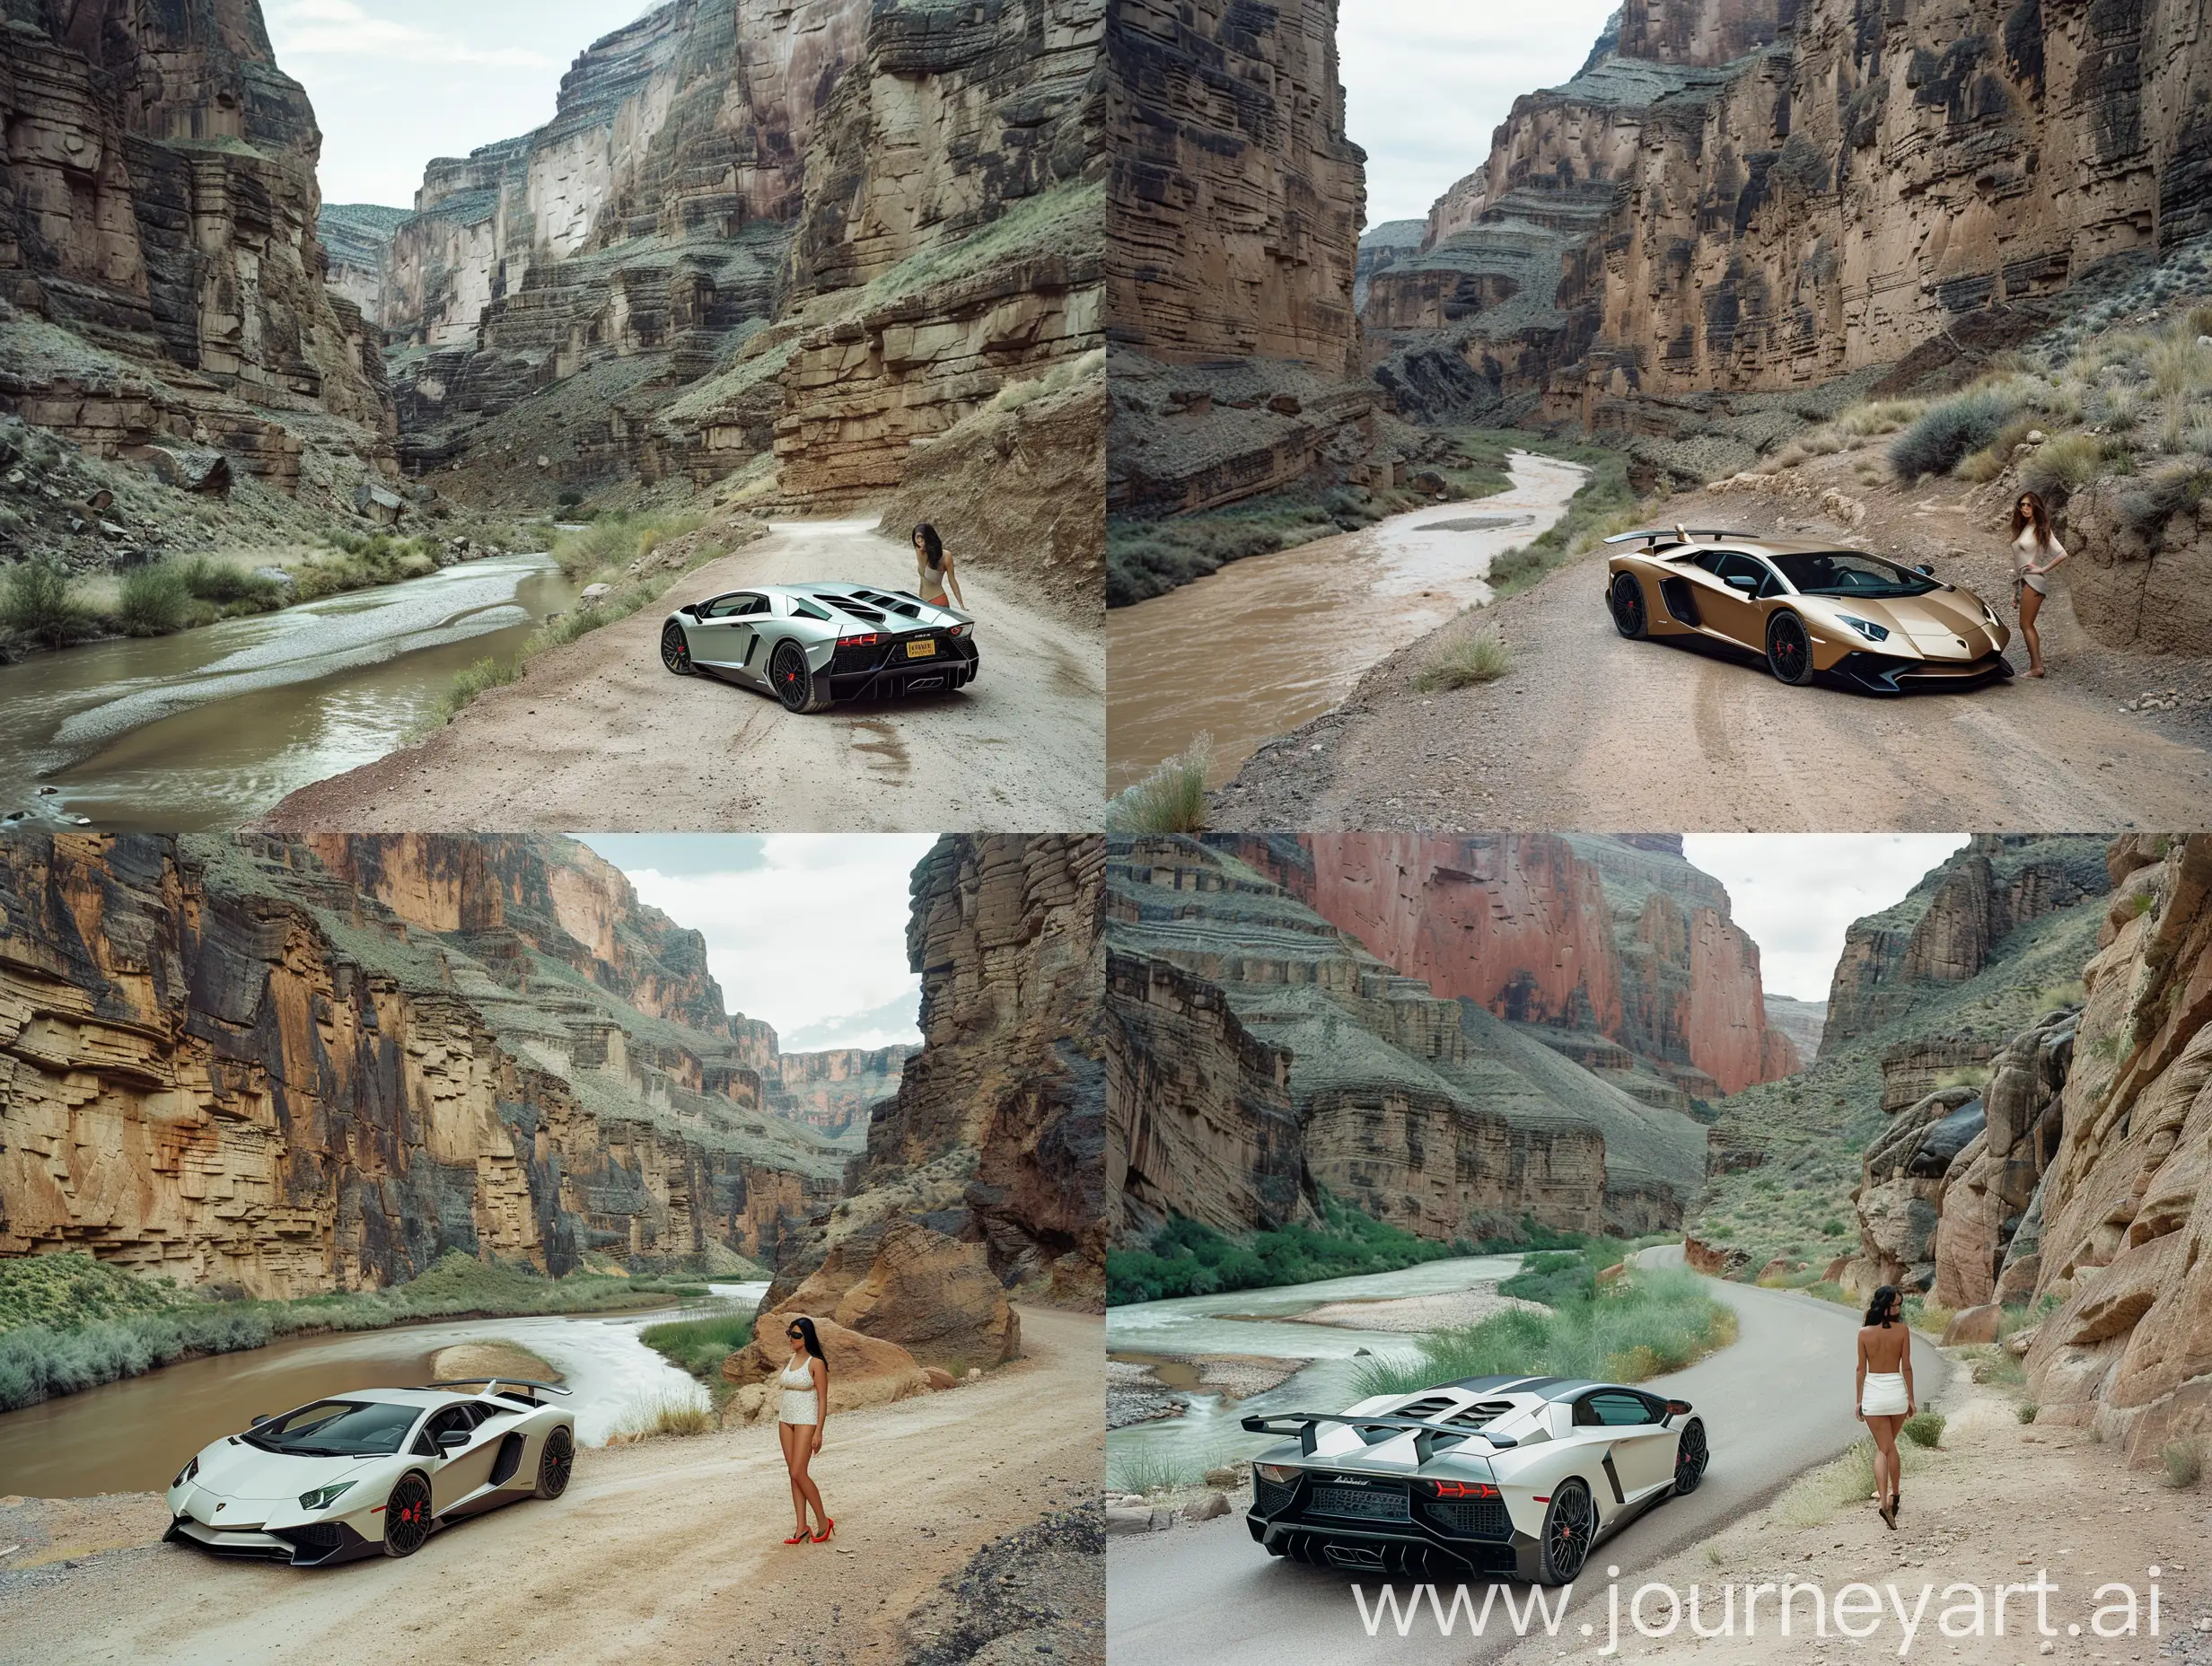 Photo of a lamborghini aventador sv and a breathless model beside it at a winding river canyon with towering walls of rock. Taken by annie liebovitz using a panavision panaflex millennium xl2 camera with a fuji provia 400x rdpiii film and a fujifilm xf 90mm lens.